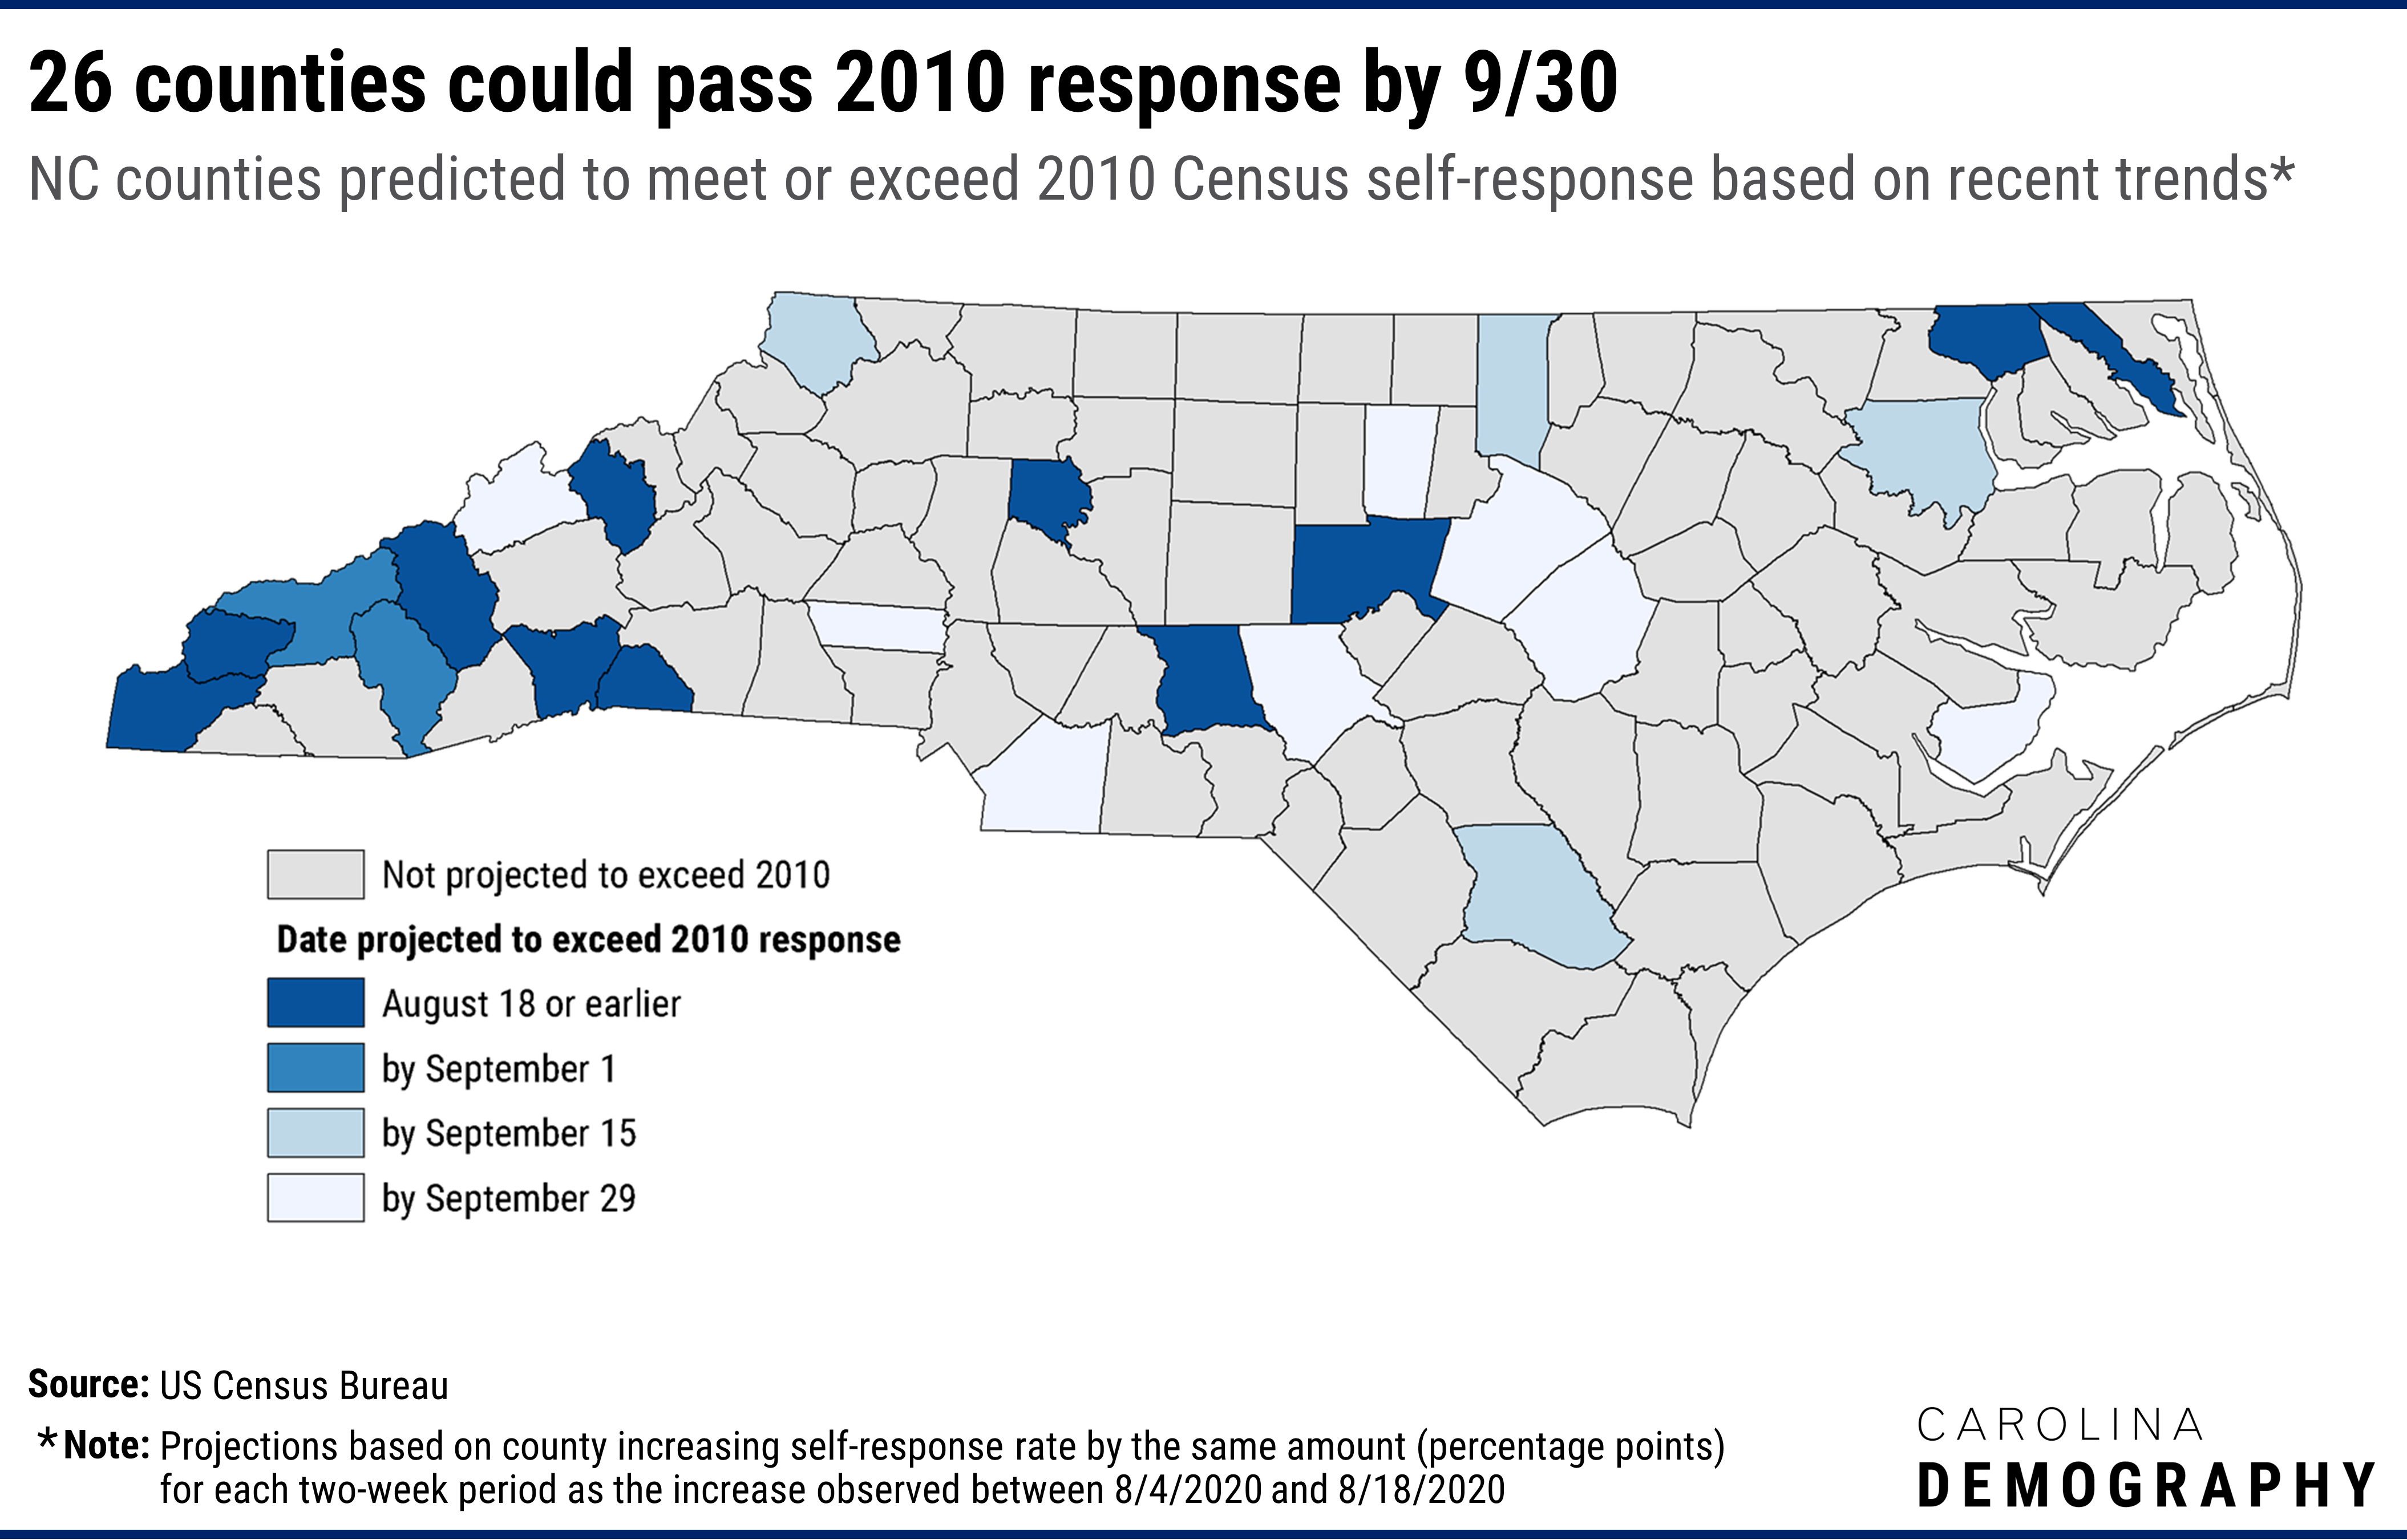 North Carolina’s census response surged during this time, increasing 0.8 percentage points between July 20th and August 4th and another 0.7 percentage points between August 4th and August 18th. This was four times the increases that occurred from late June through mid-July. If the trends observed between 8/4-8/18 continue for each two-week period through September 30th, another 15 counties will meet or exceed their 2010 rates:  Jackson and Swain by September 1; Ashe, Bertie, Bladen, and Granville by September 15; and Johnston, Lincoln, Madison, Moore, Orange, Pamlico, Union, and Wake by September 29.